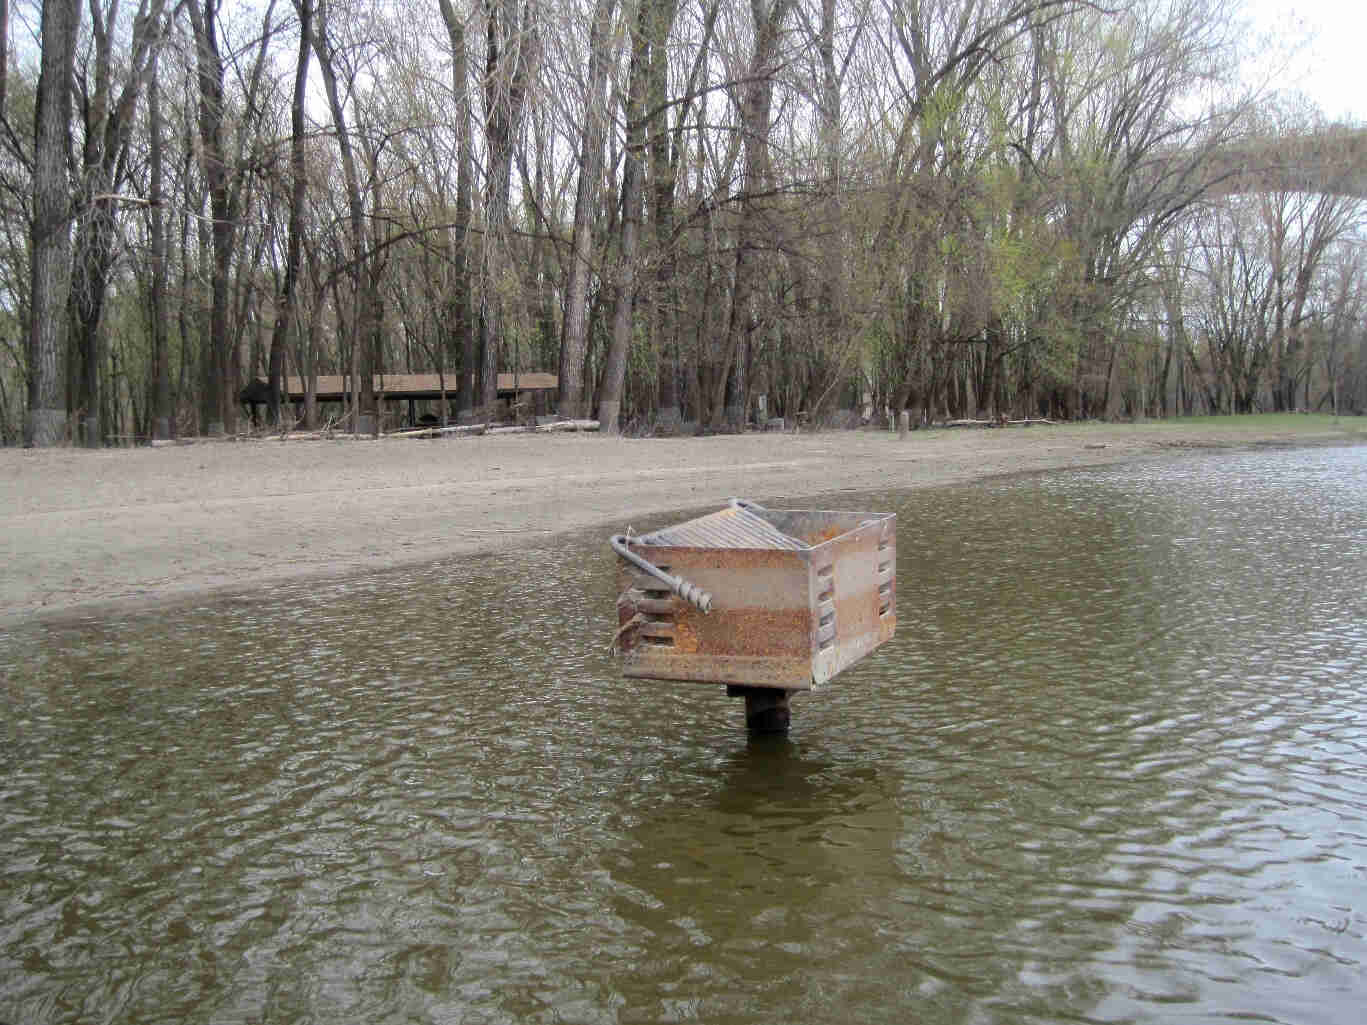 View front a river, with a park grill standing in a flooded water, with a sand bank and bare trees in the background 